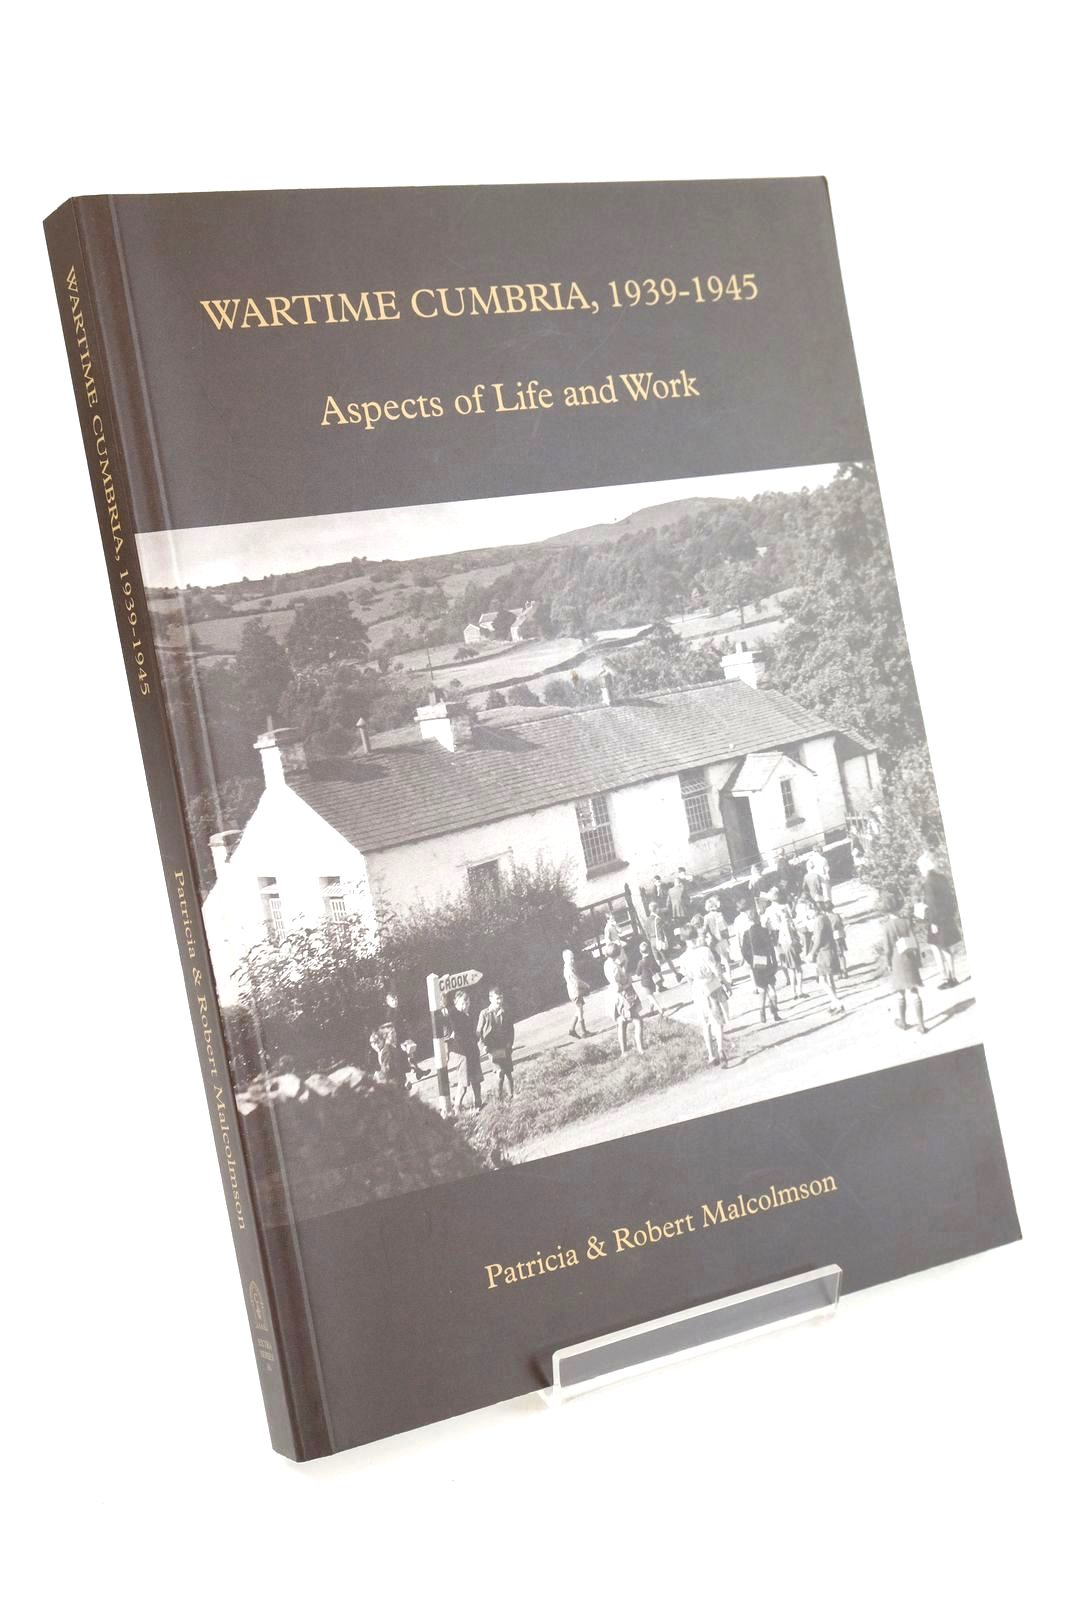 Photo of WARTIME CUMBRIA, 1939-1945 ASPECTS OF LIFE AND WORK written by Malcolmson, Patricia Macolmson, Robert published by Cumberland and Westmorland Antiquarian and Archaeological Society (STOCK CODE: 1325194)  for sale by Stella & Rose's Books